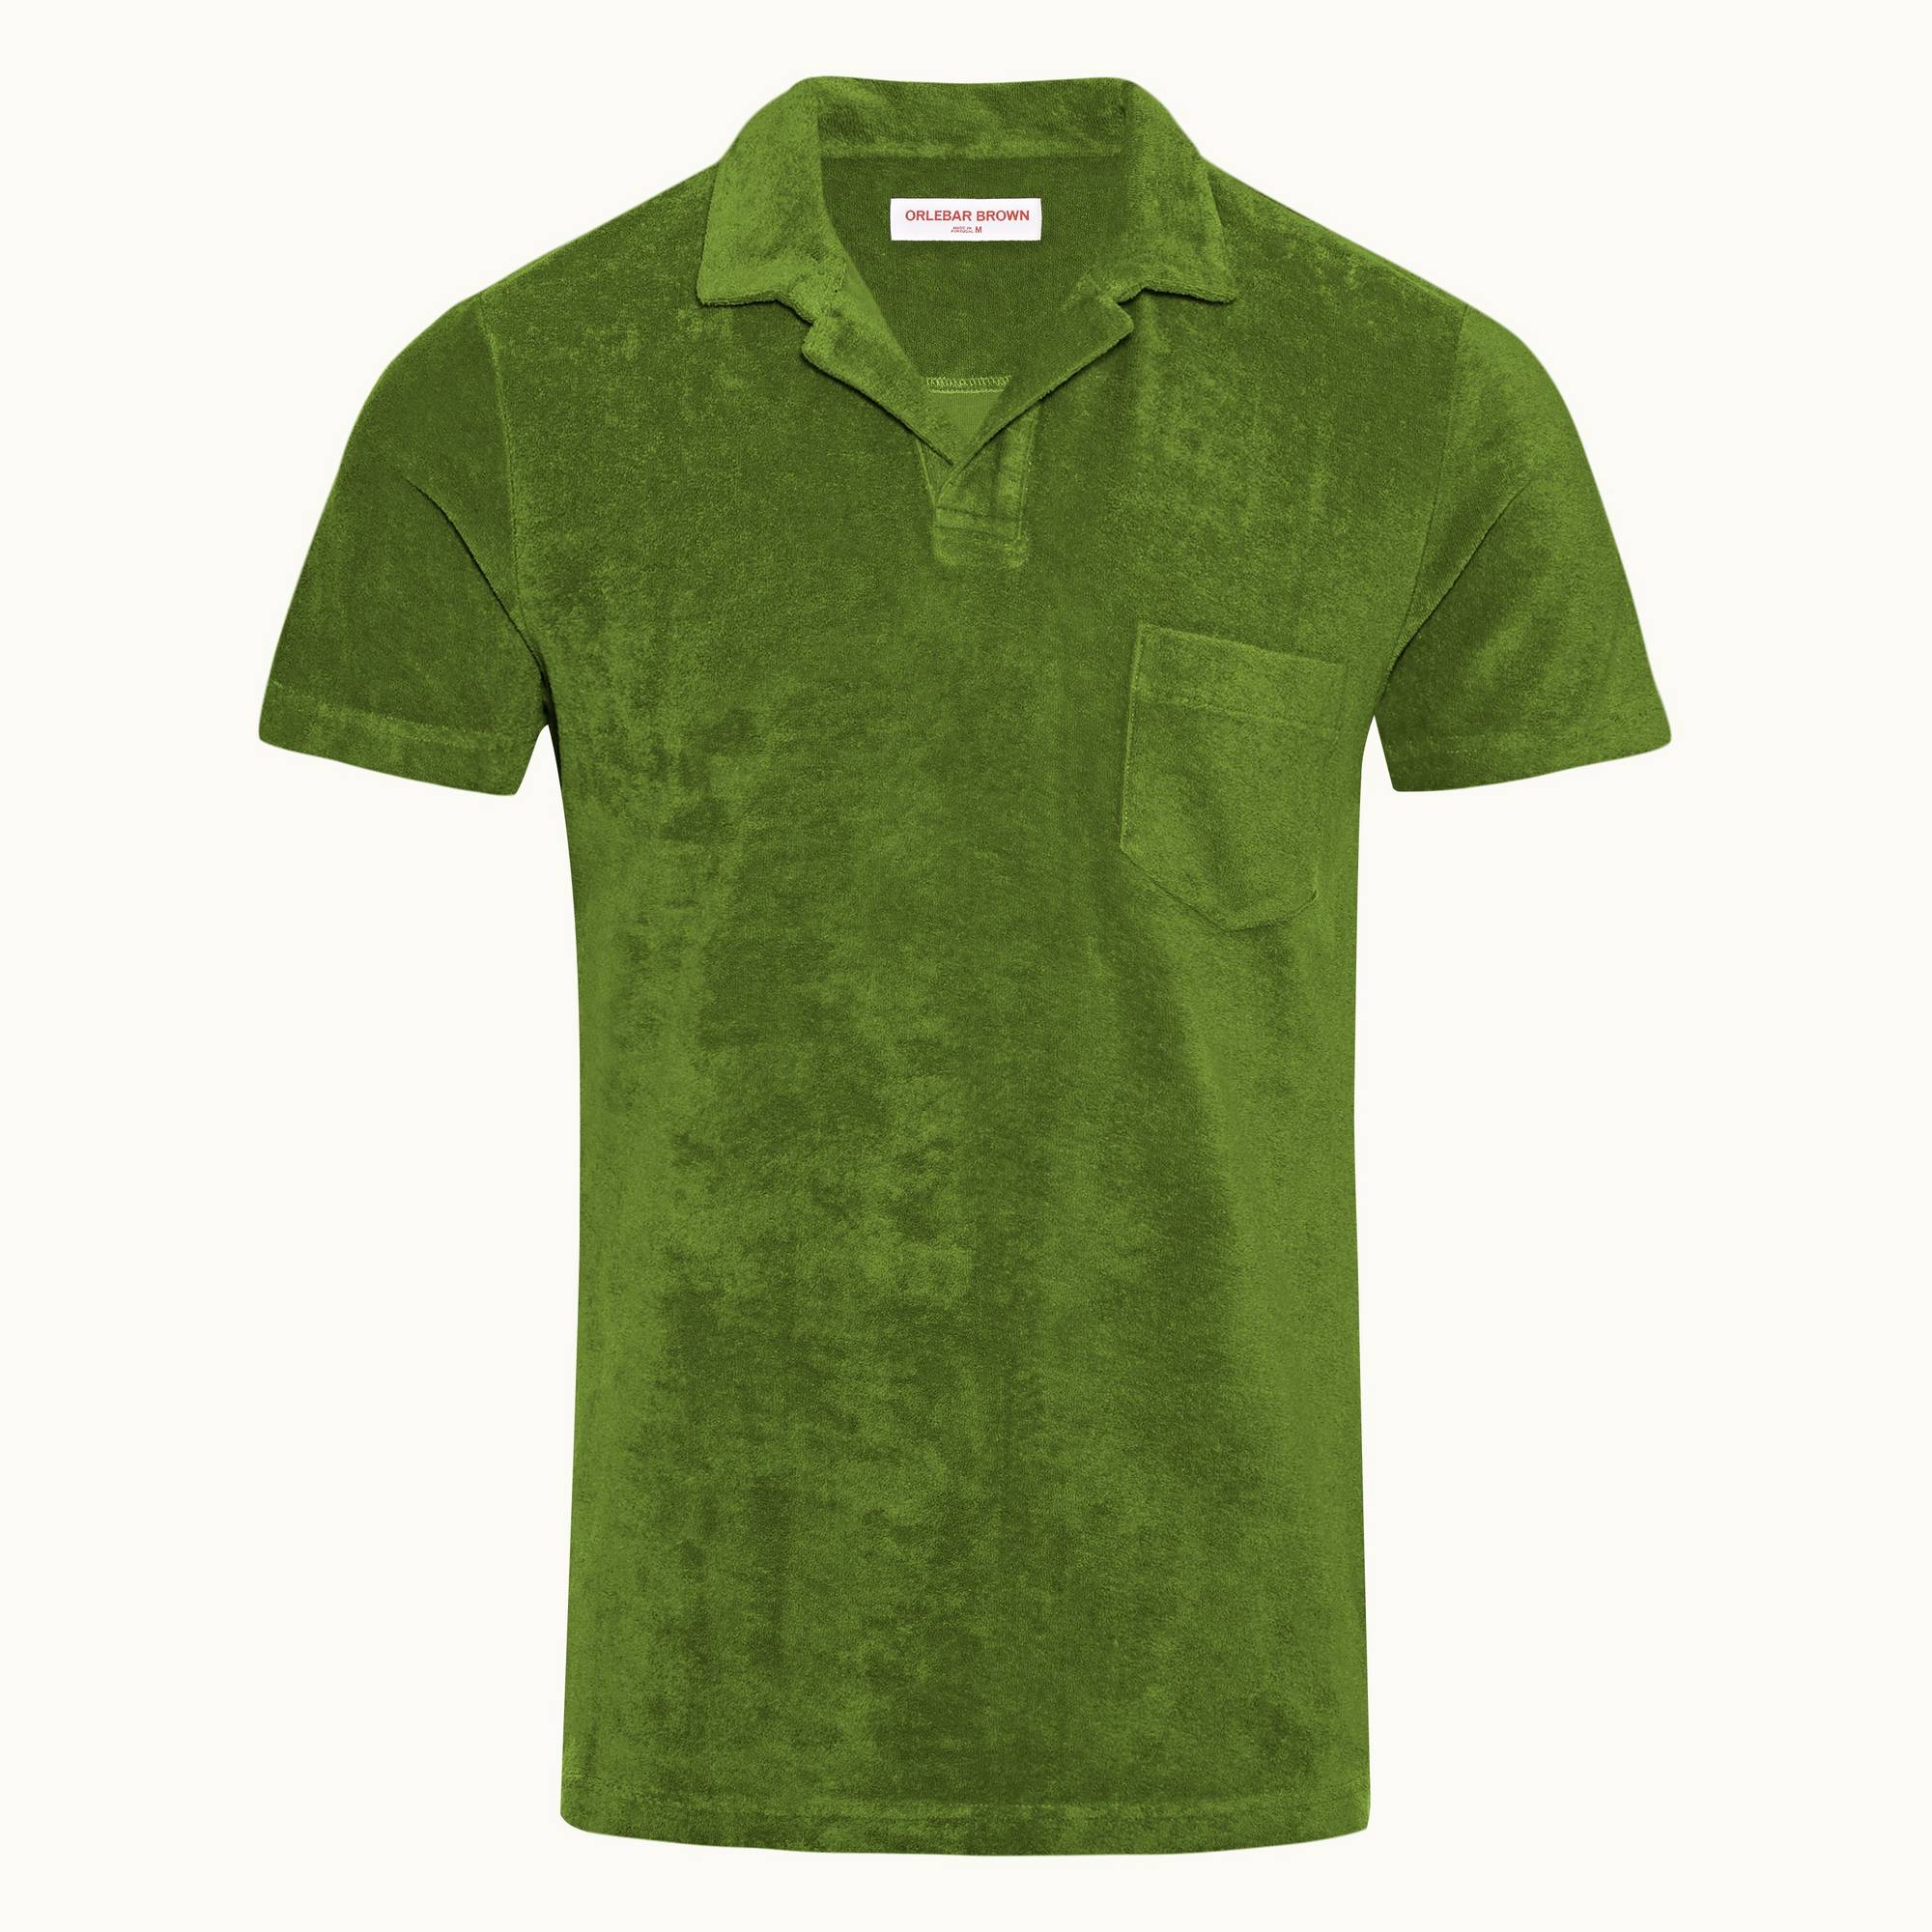 Terry Towelling - Mens Conifer Tailored Fit Towelling Resort Polo Shirt